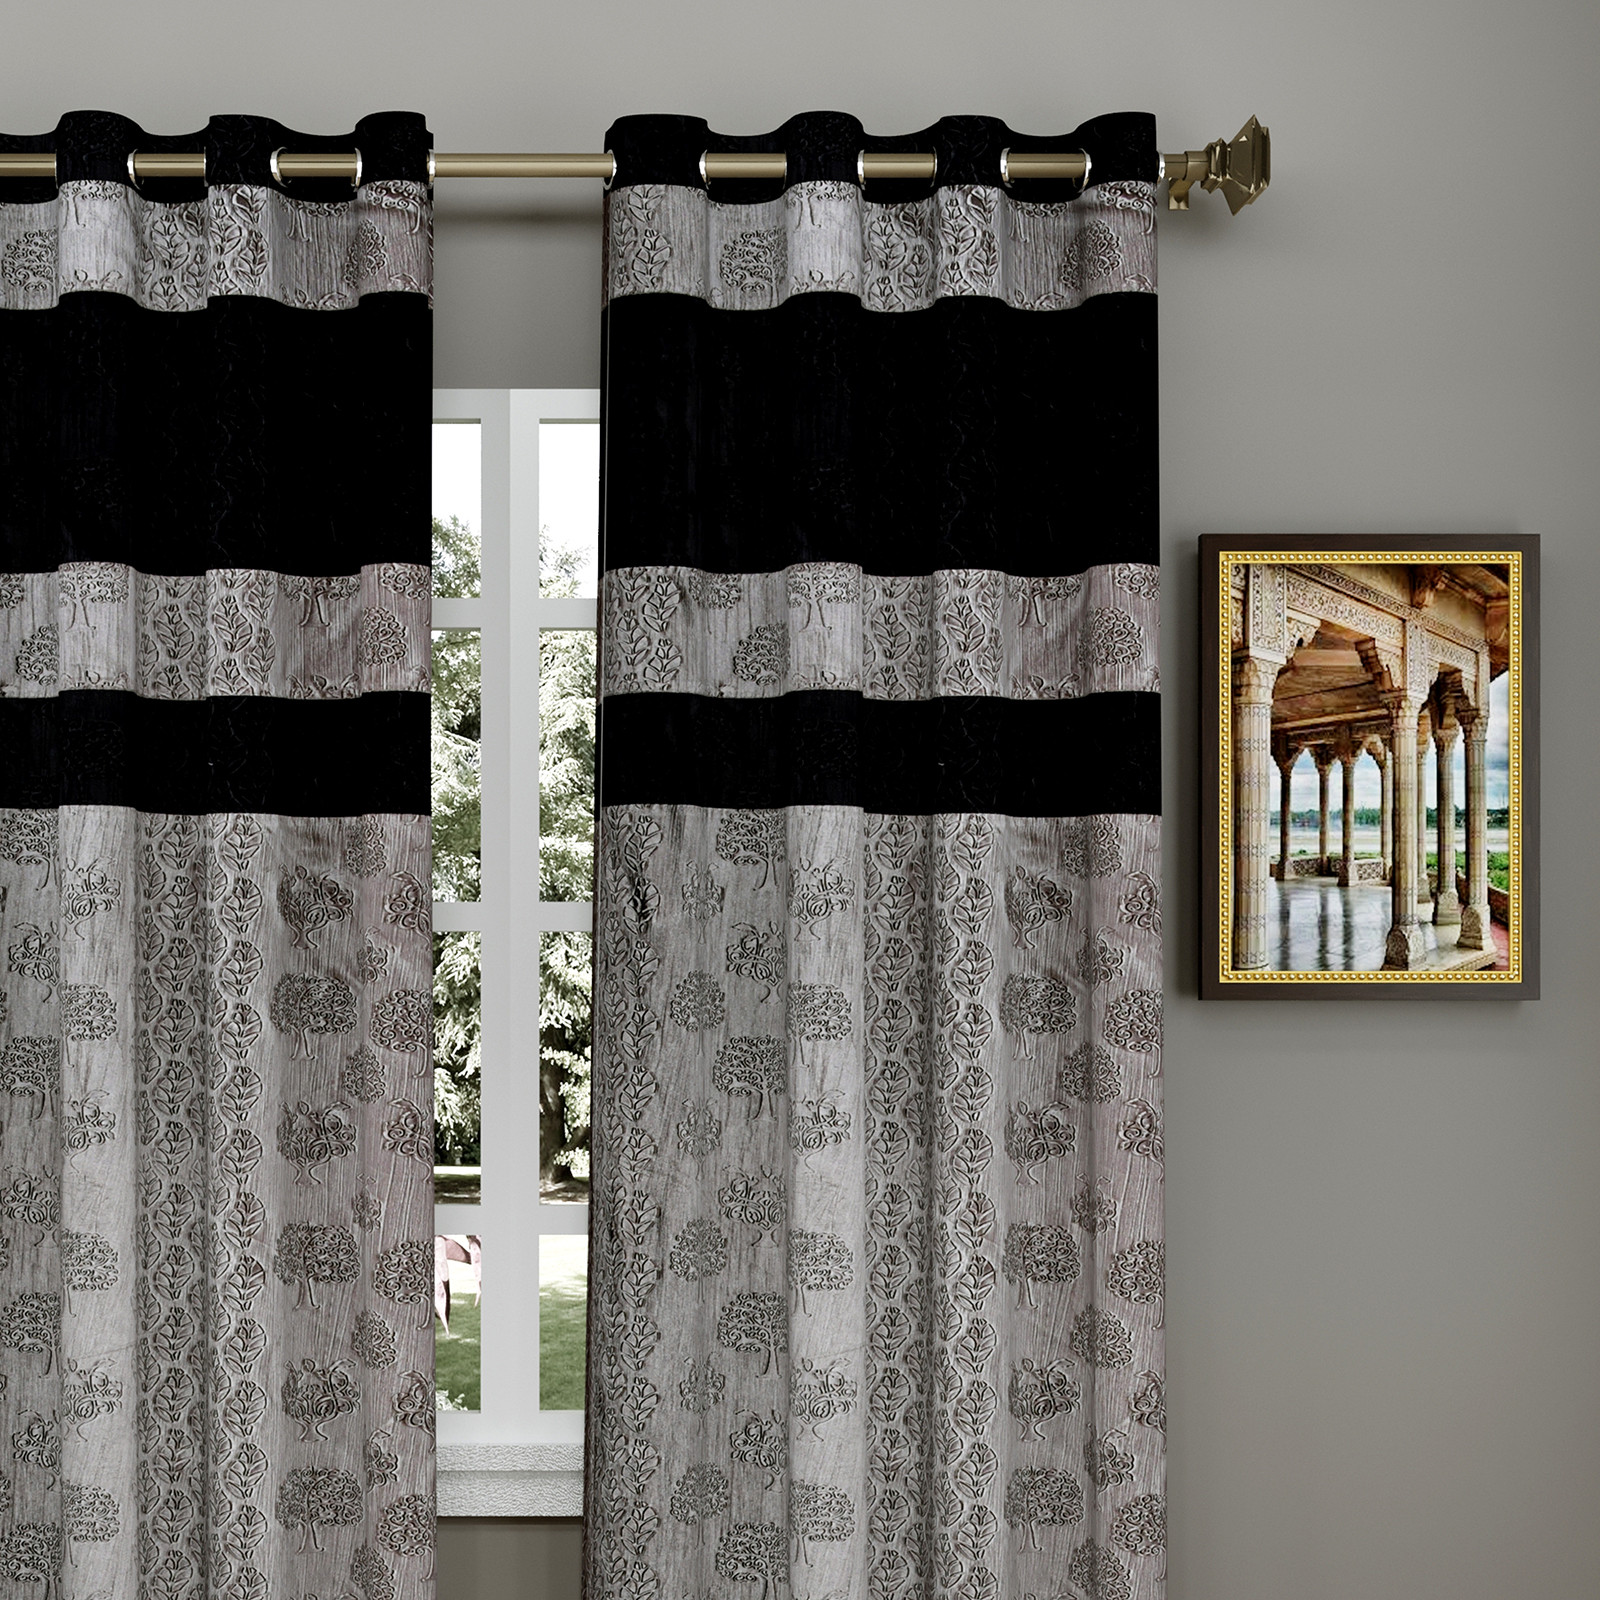 Kuber Industries Forest Printed 7 Feet Door Curtain For Living Room, Bed Room, Kids Room With 8 Eyelet (Black & Grey)-HS43KUBMART25609